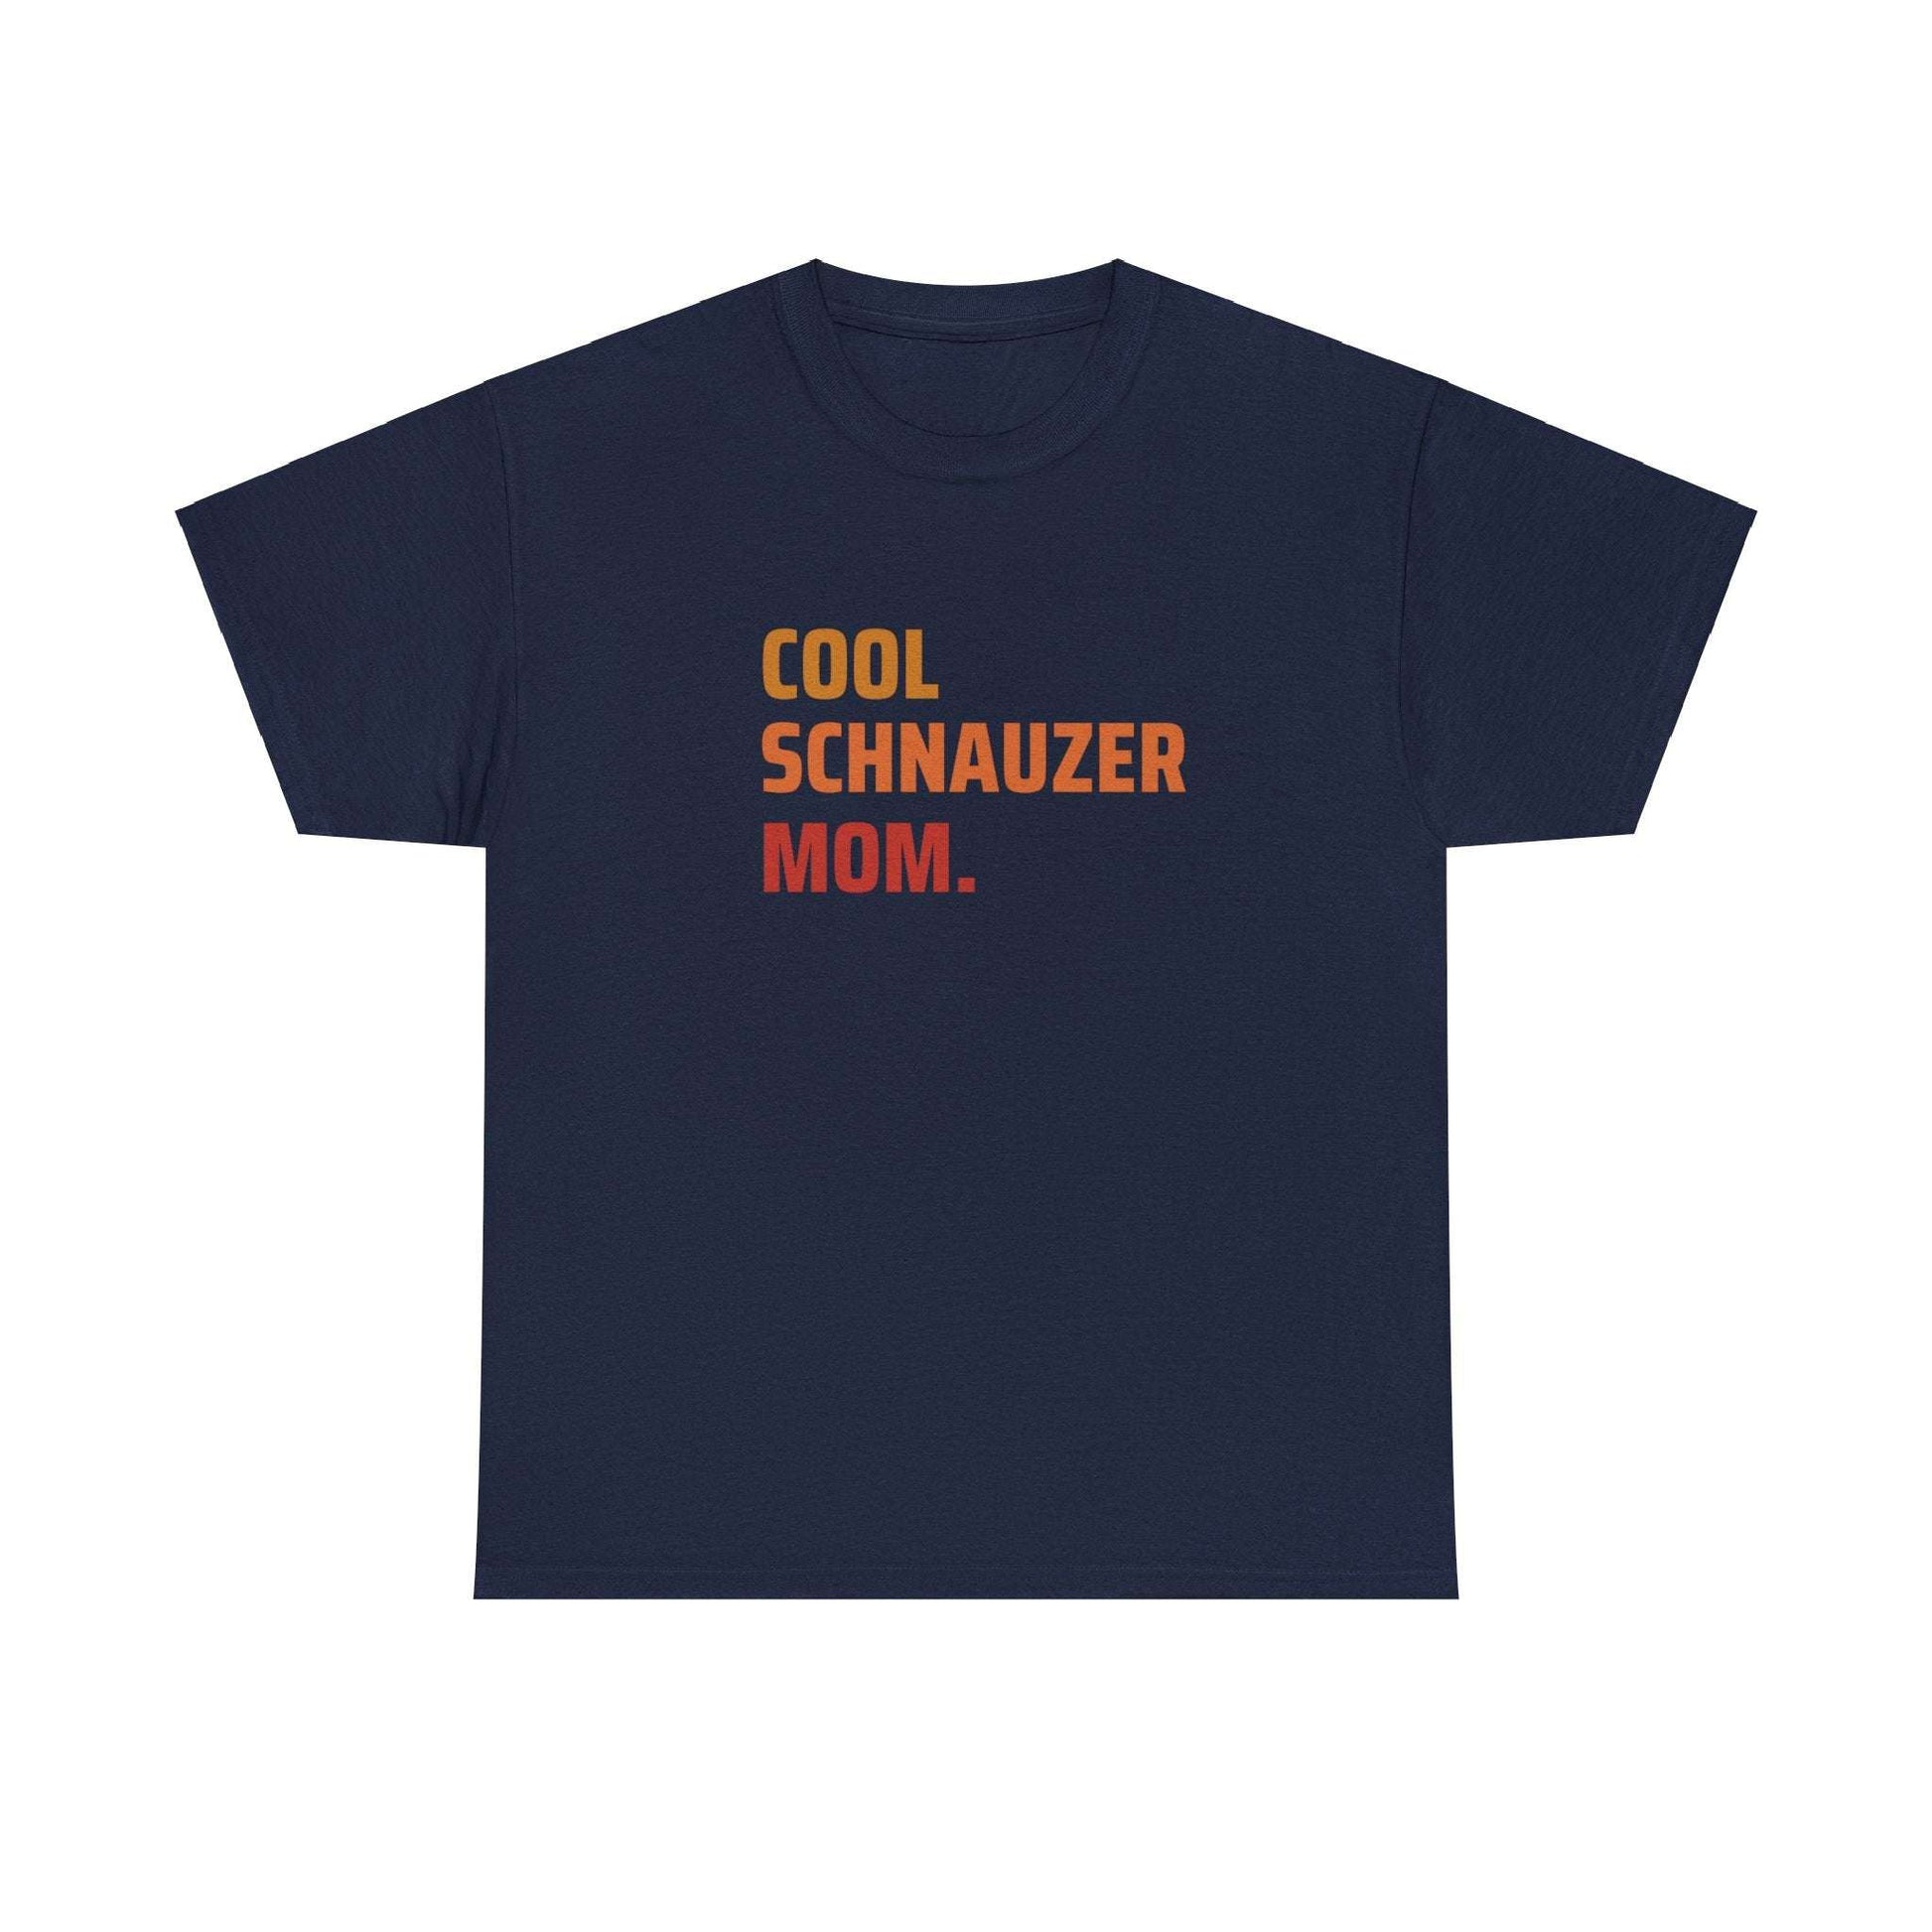 Fabulous Tee Shirts' 'Cool Schnauzer Mom' blue t-shirt displayed to emphasize its unique design and premium quality.